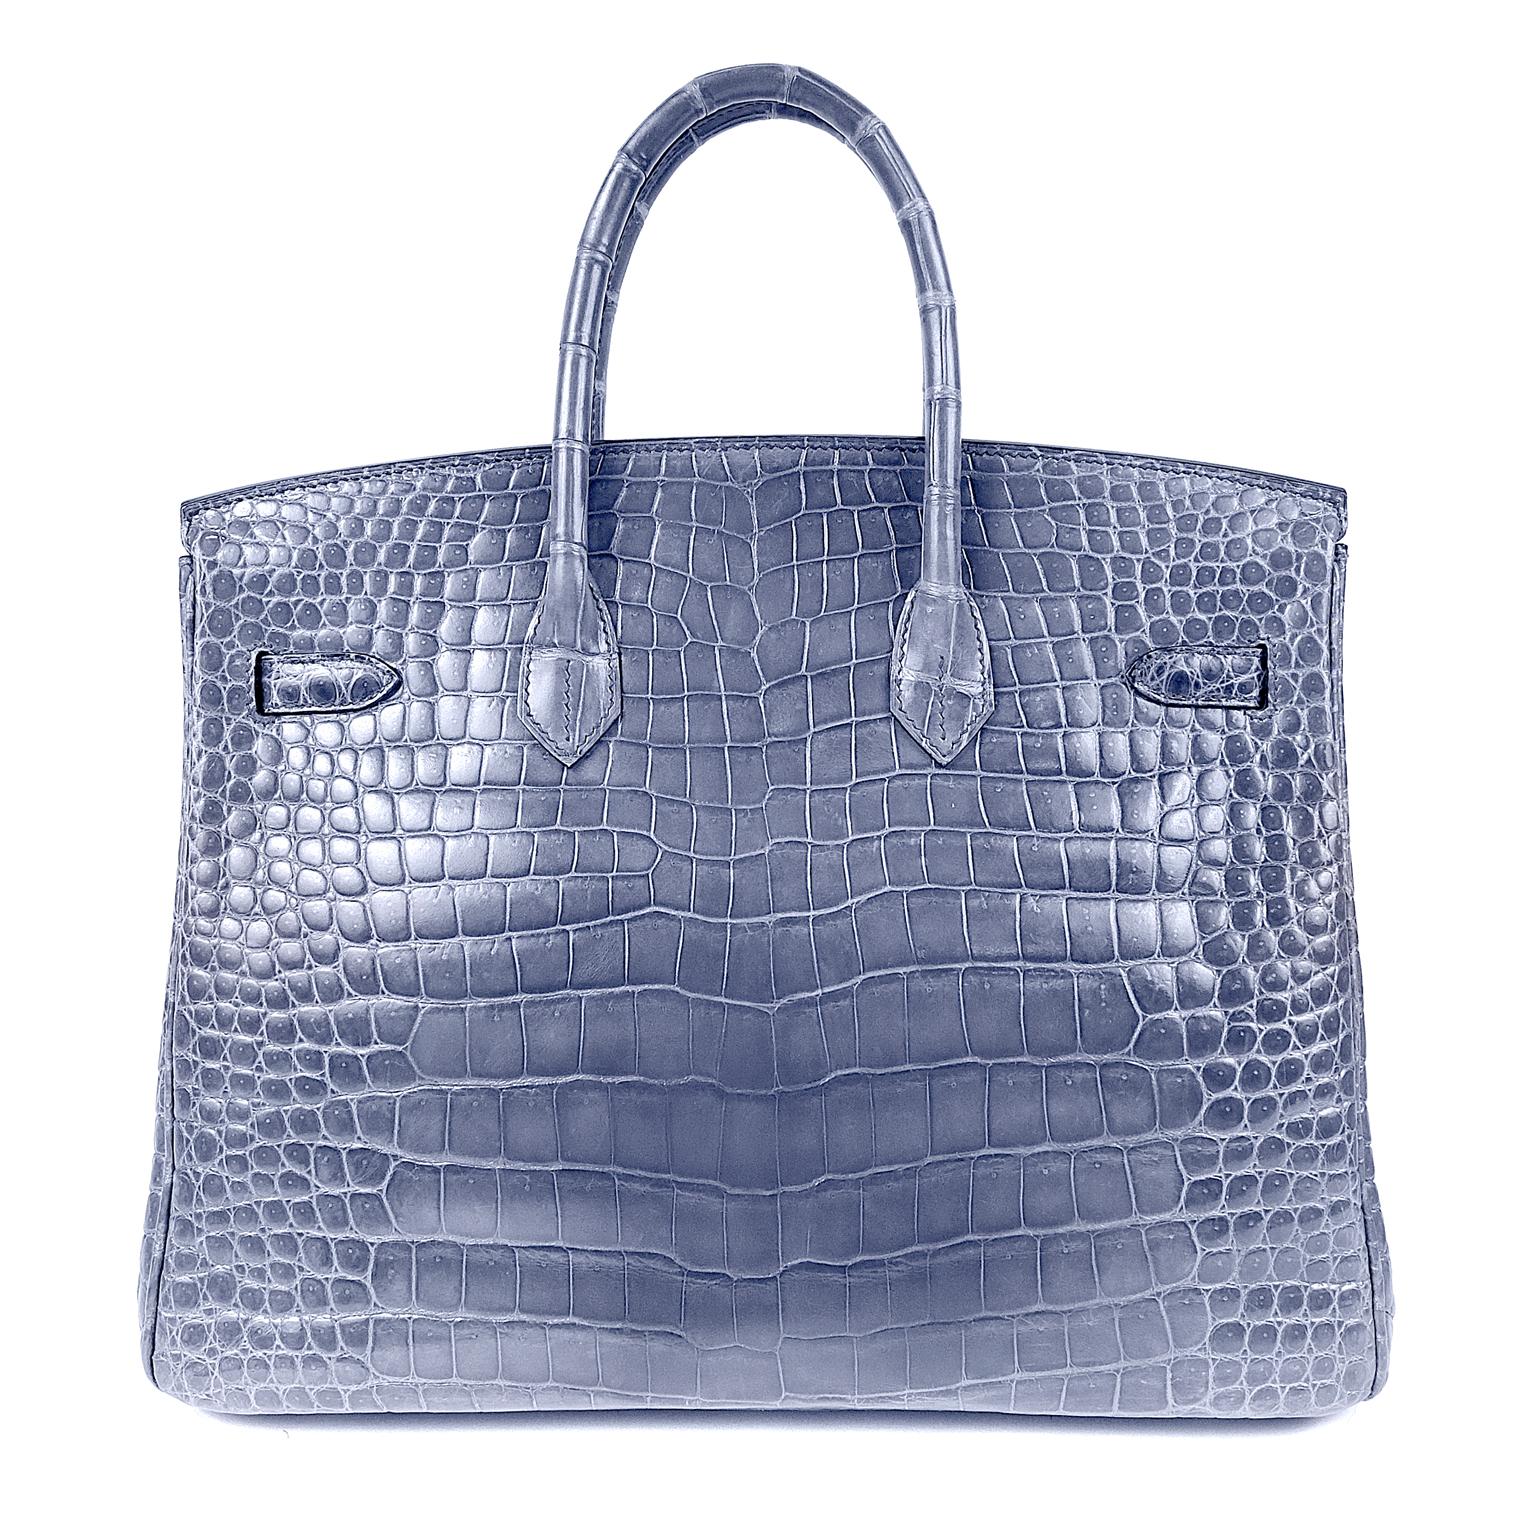 Hermès Blue Brighton Porosus Crocodile 35 cm Birkin Bag- Pristine Condition; meticulously stored.     
Hermès bags are considered the ultimate luxury item the world over.  Hand stitched by skilled craftsmen, wait lists of a year or more are